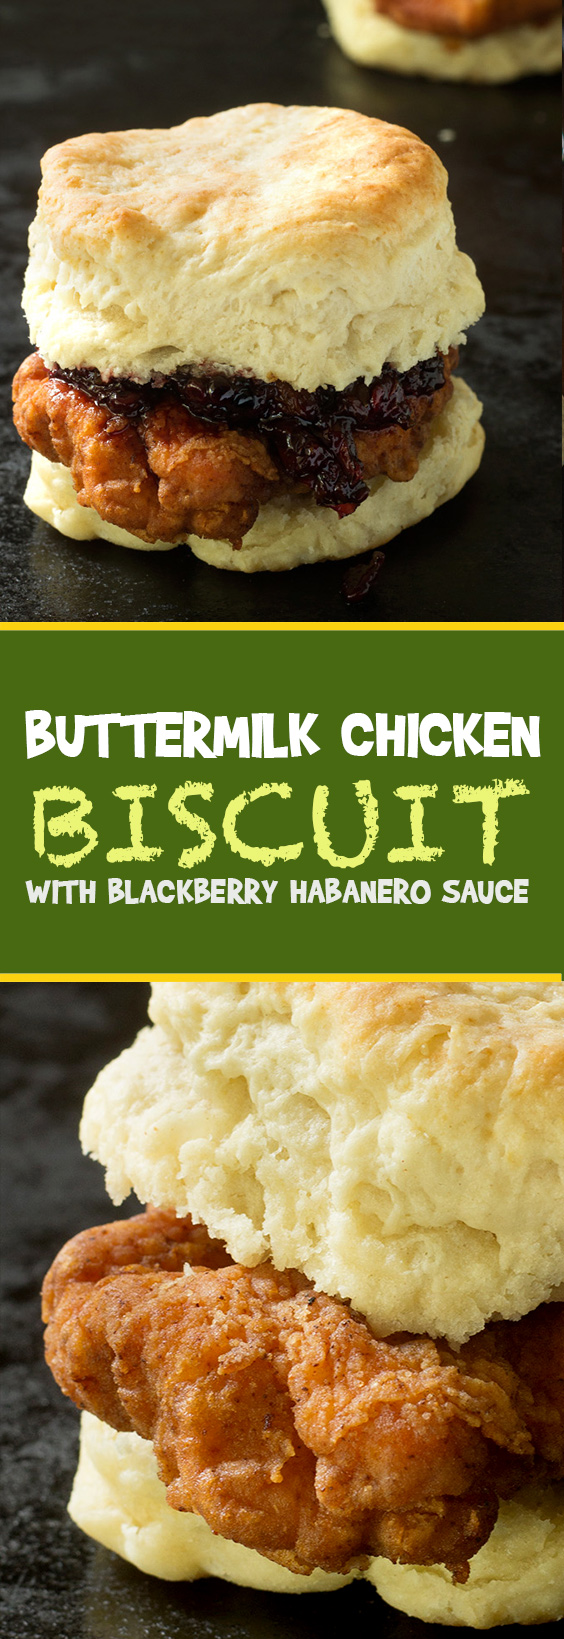 Over the top buttermilk chicken biscuit with blackberry habanero sauce is crispy, flaky a little sweet, spicy and a lot of delicious.